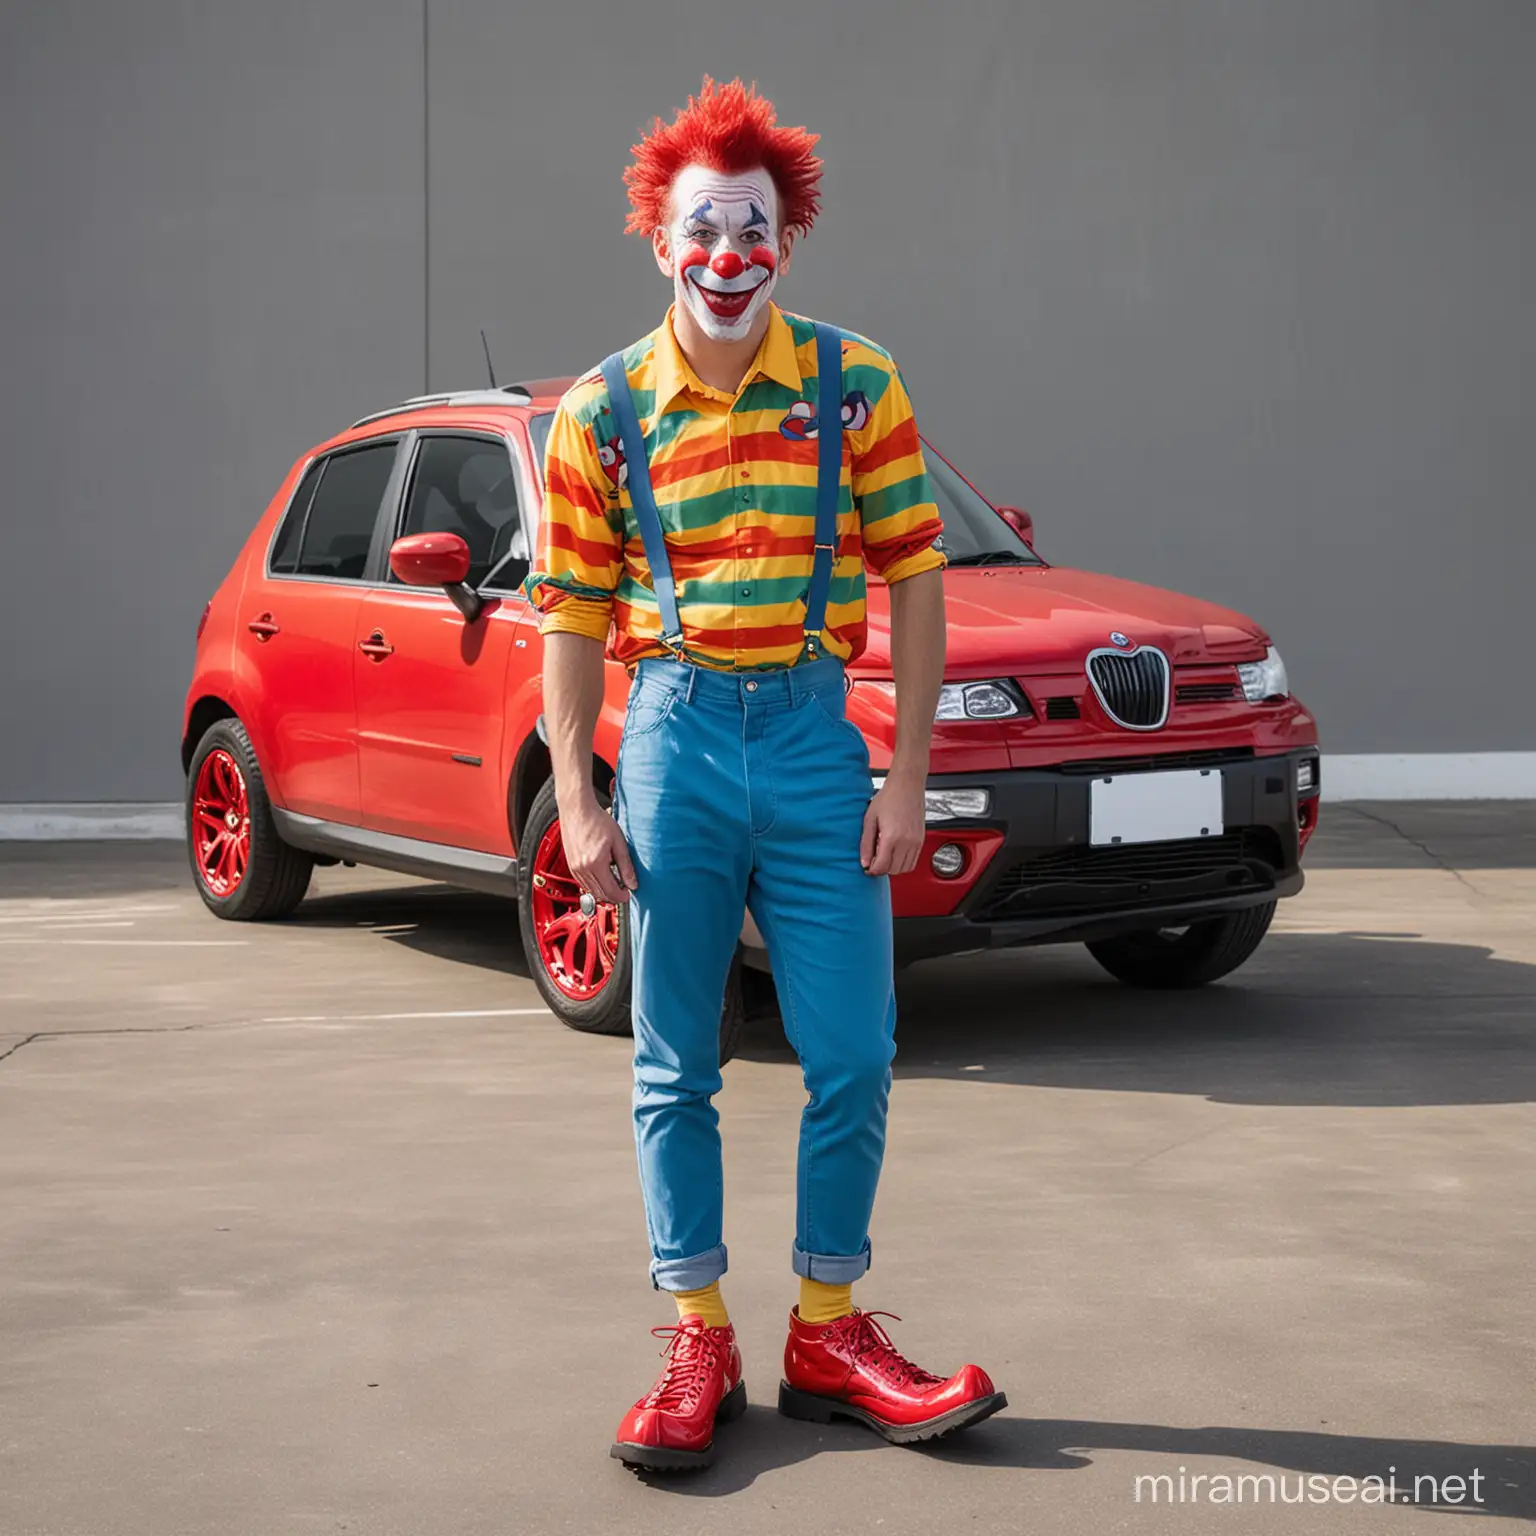 Proud Man in Clown Shoes Standing by New Car